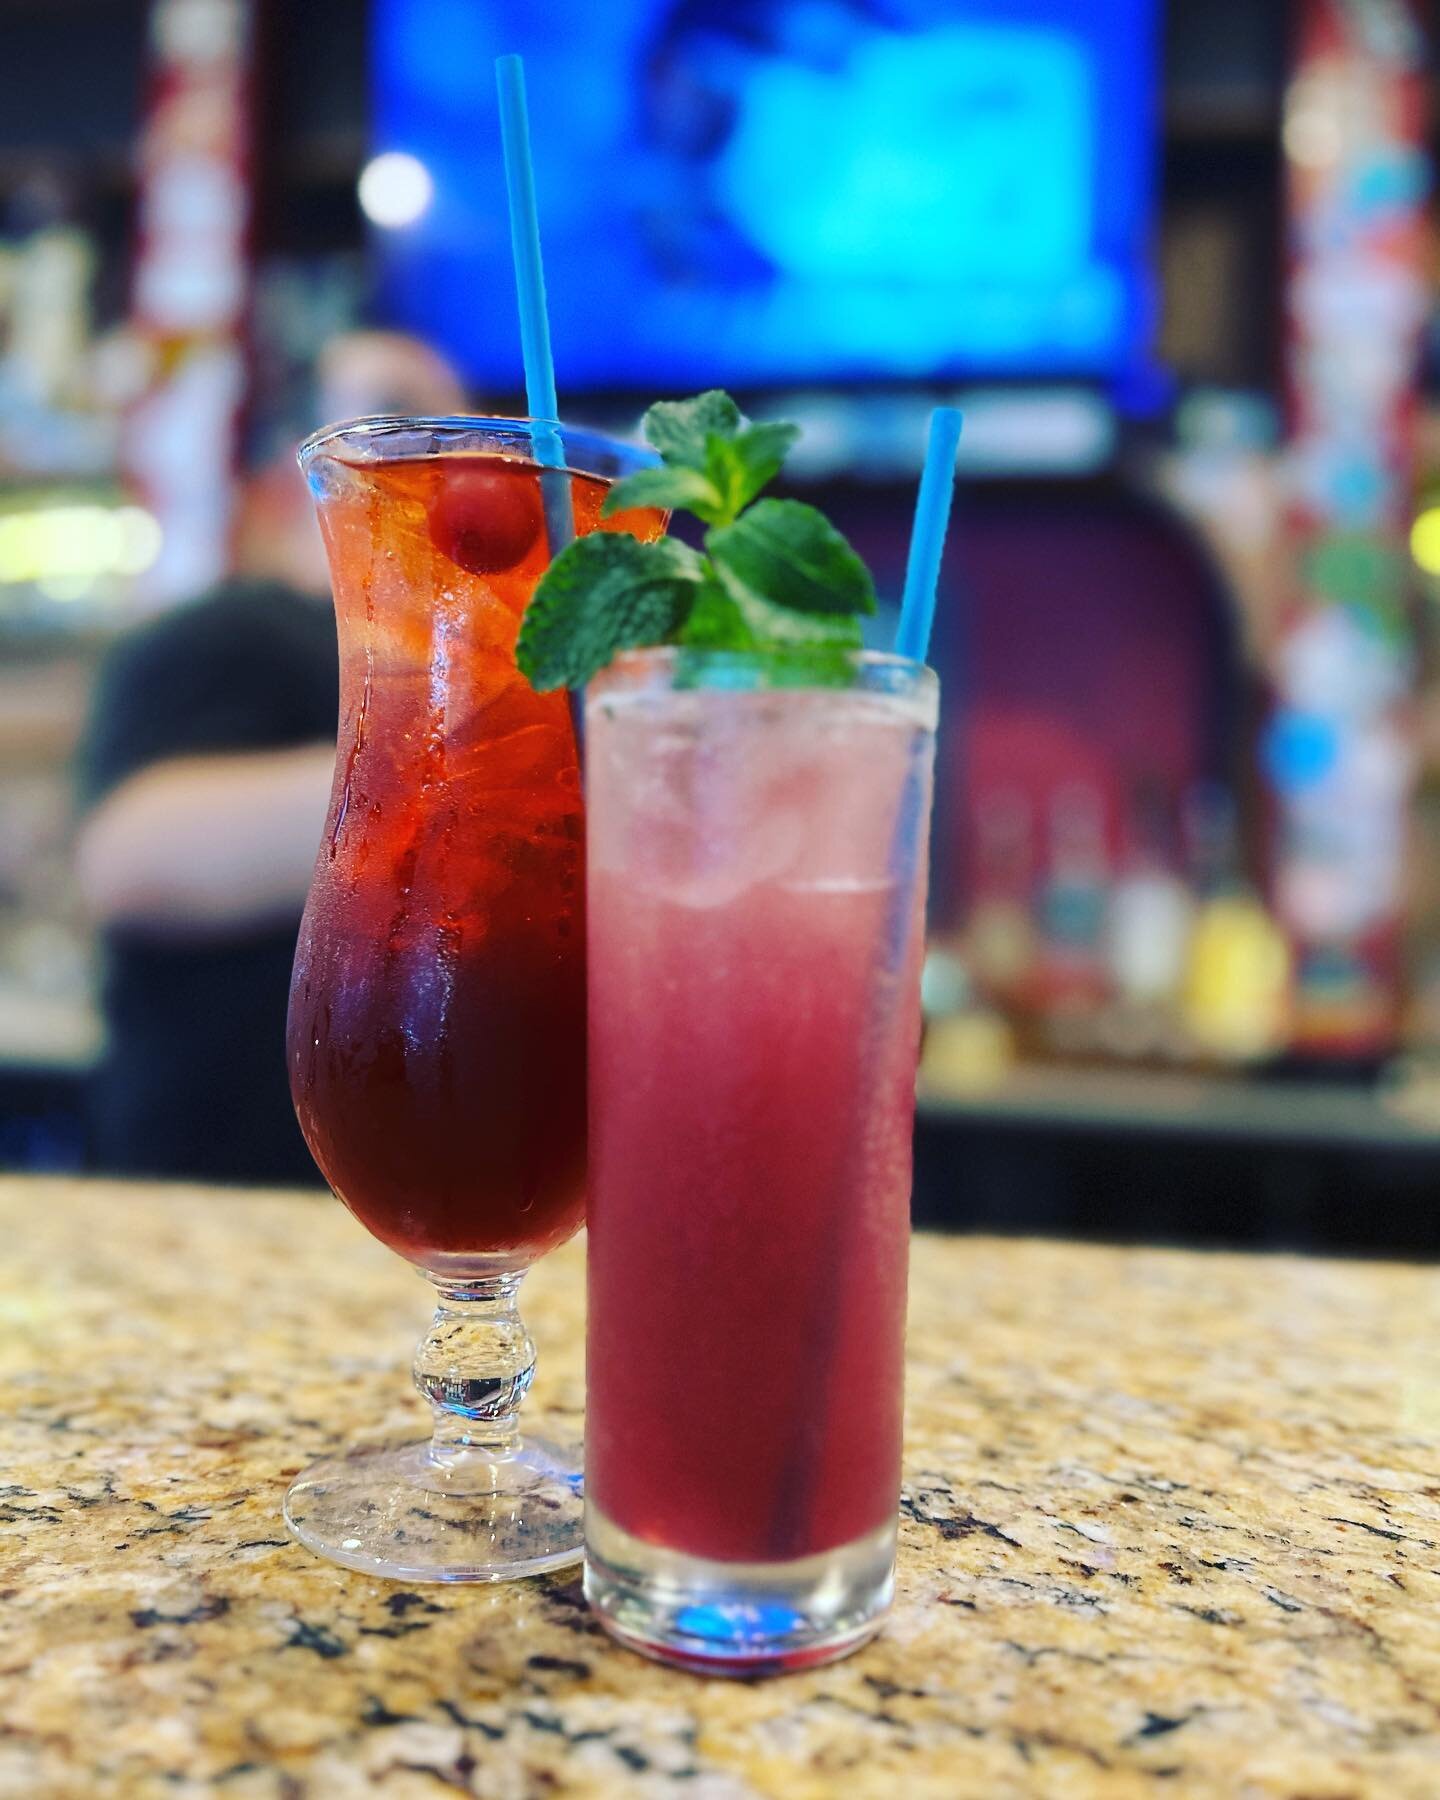 Not only does @thenonaslicehouse have fantastic pizza but they also make some outstanding cocktails as well! 

#nonaslicehouse #safetyharborfl #detroitsytlepizza #pizzalover #pizzapizzapizza #pinellascounty #safetyharborflorida #pizzaforever #food #f